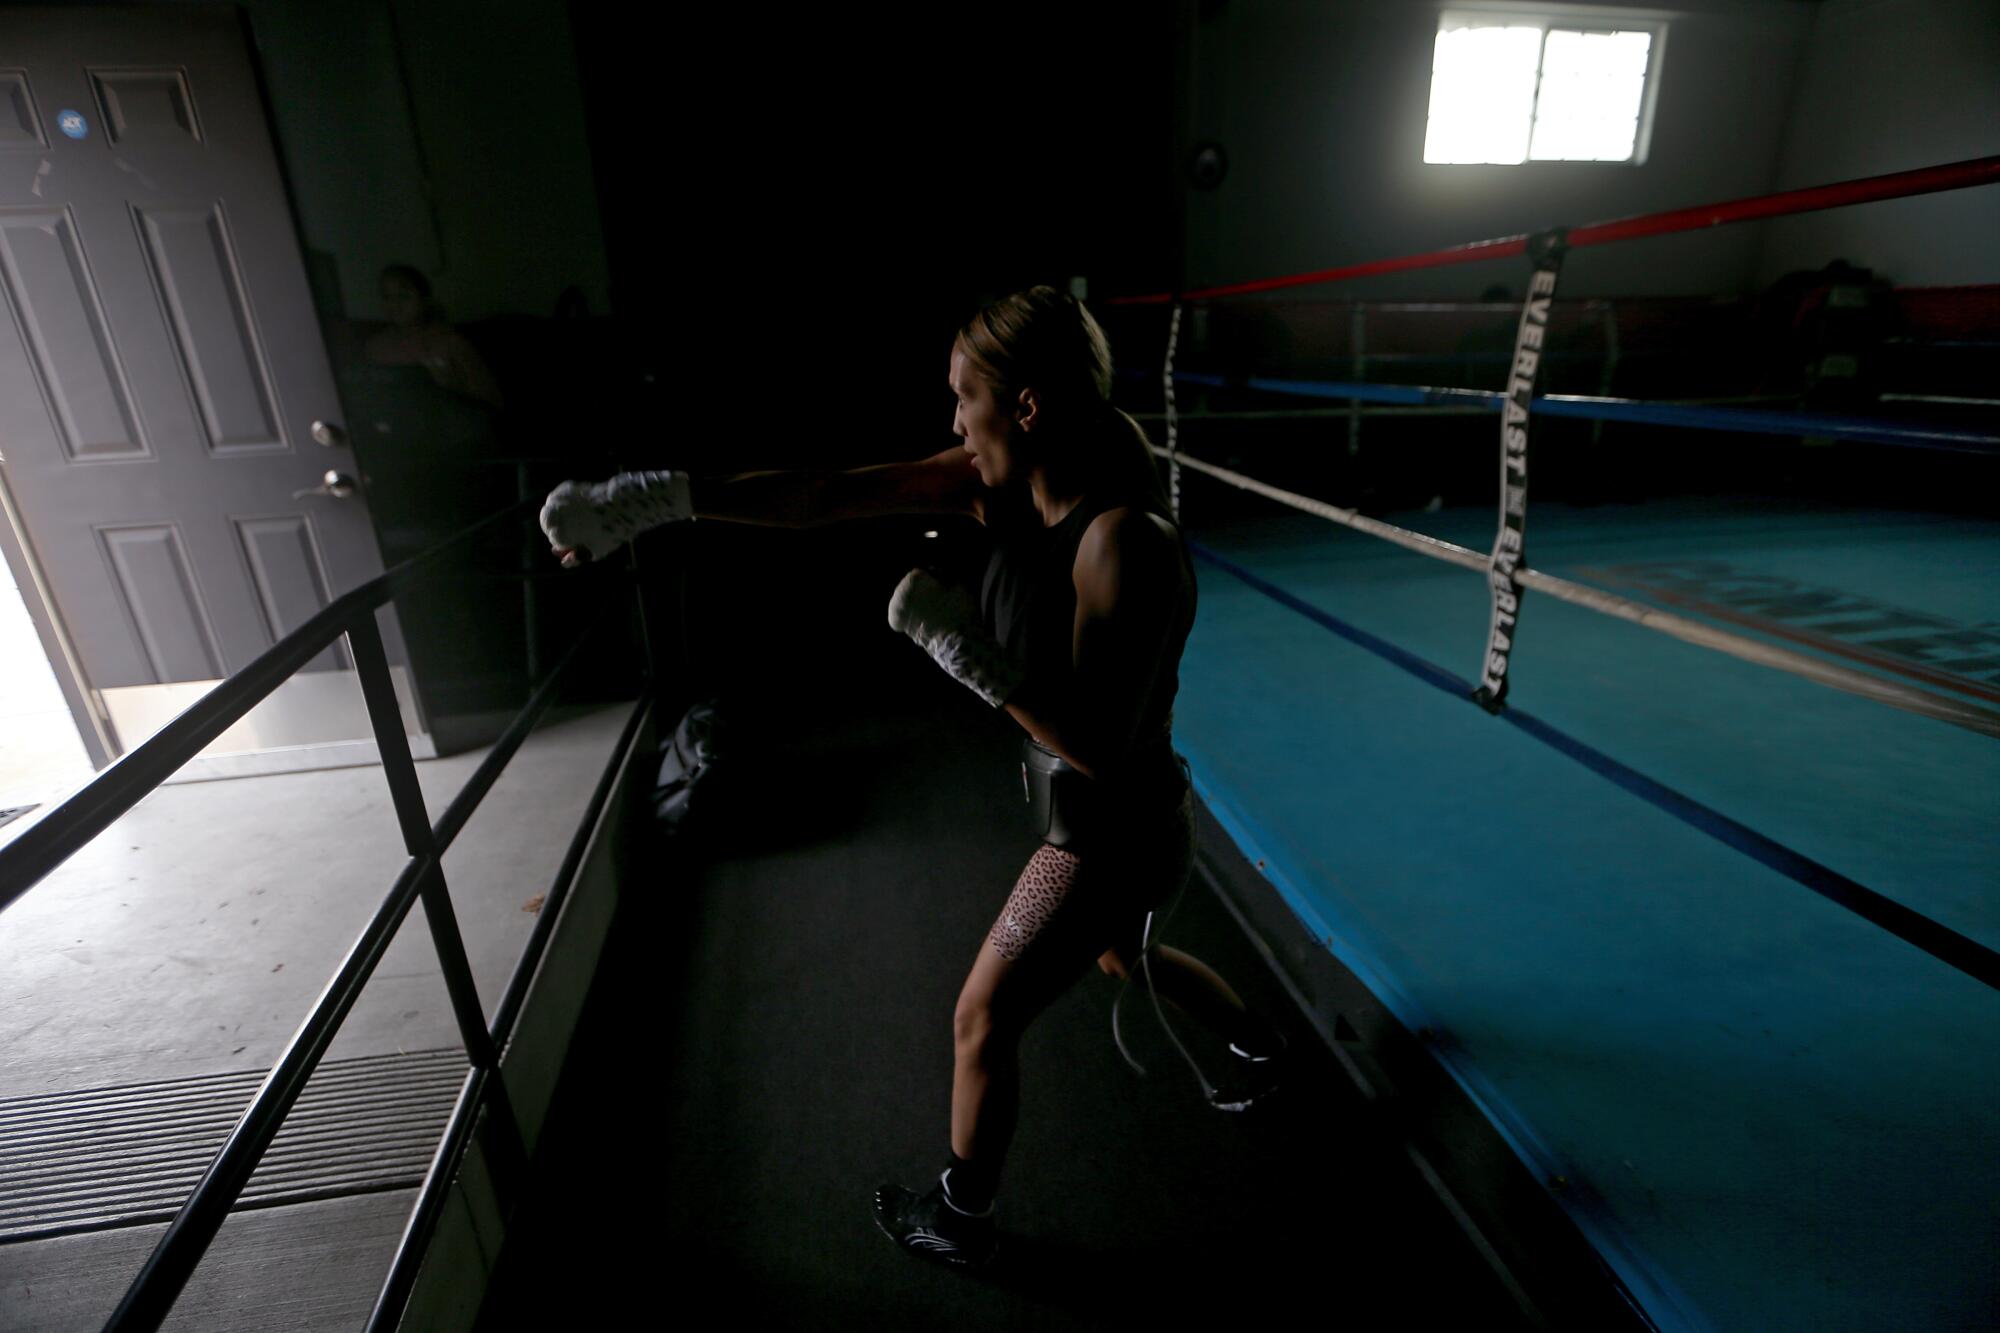 Seniesa Estrada shadow boxes before a sparring session at a nondescript gym in Bell Gardens.